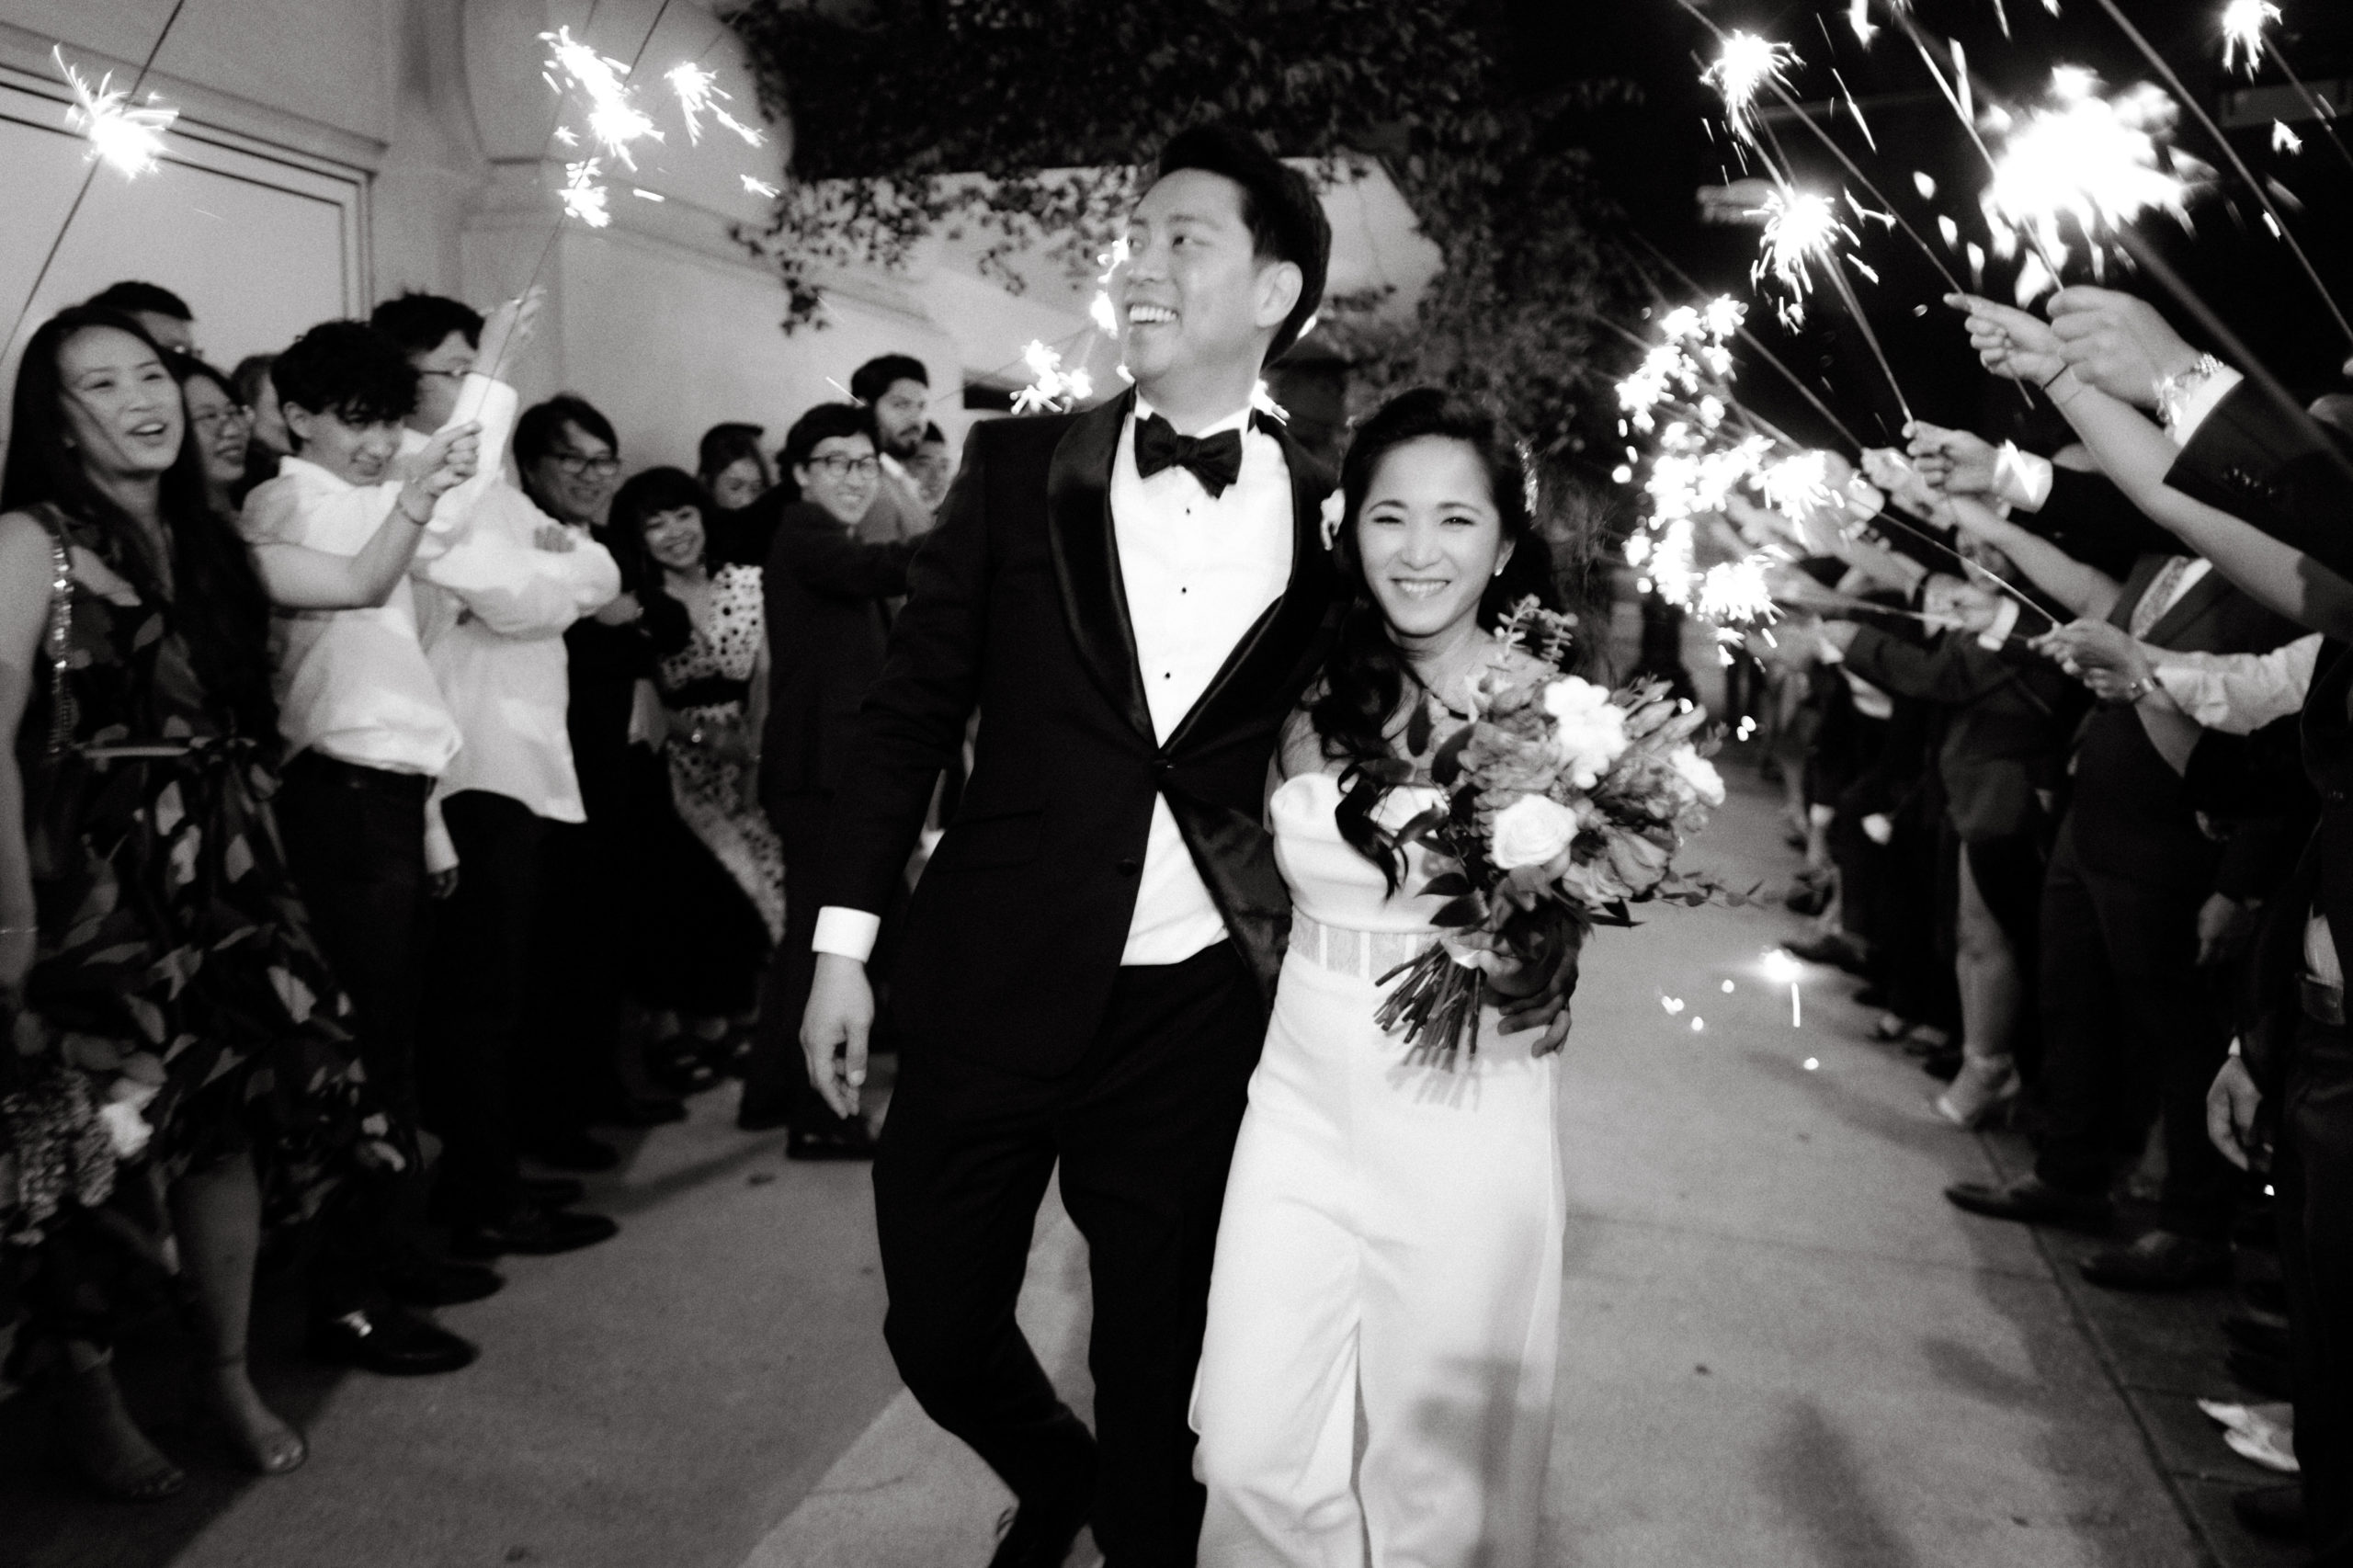 Editorial photo of the bride and groom as they exit the wedding venue. Image by Jenny Fu Studio 